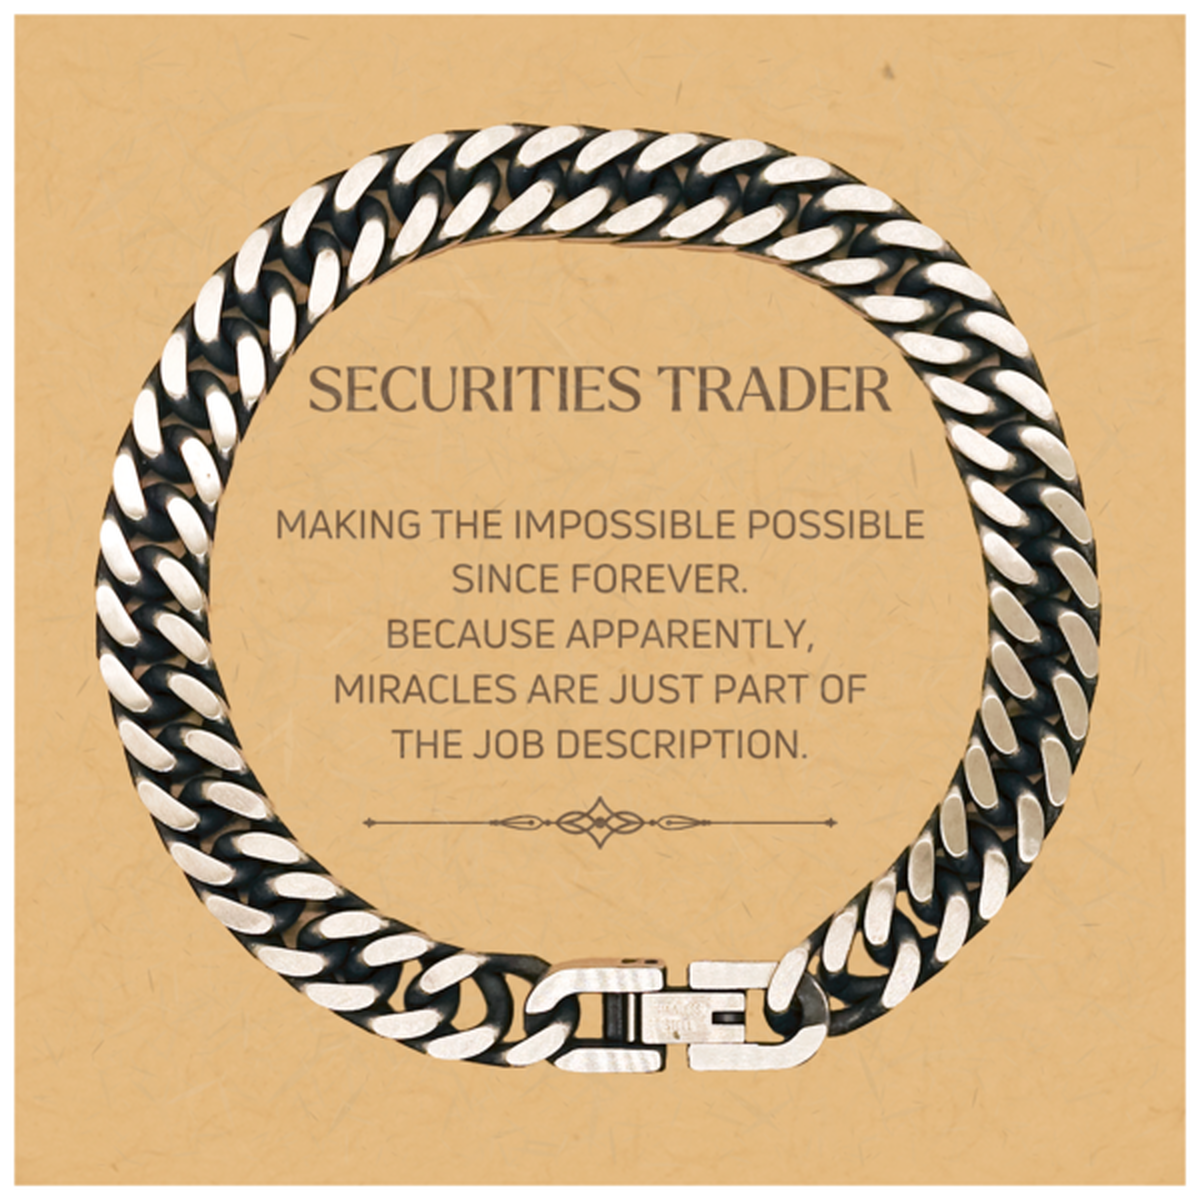 Funny Securities Trader Gifts, Miracles are just part of the job description, Inspirational Birthday Christmas Cuban Link Chain Bracelet For Securities Trader, Men, Women, Coworkers, Friends, Boss